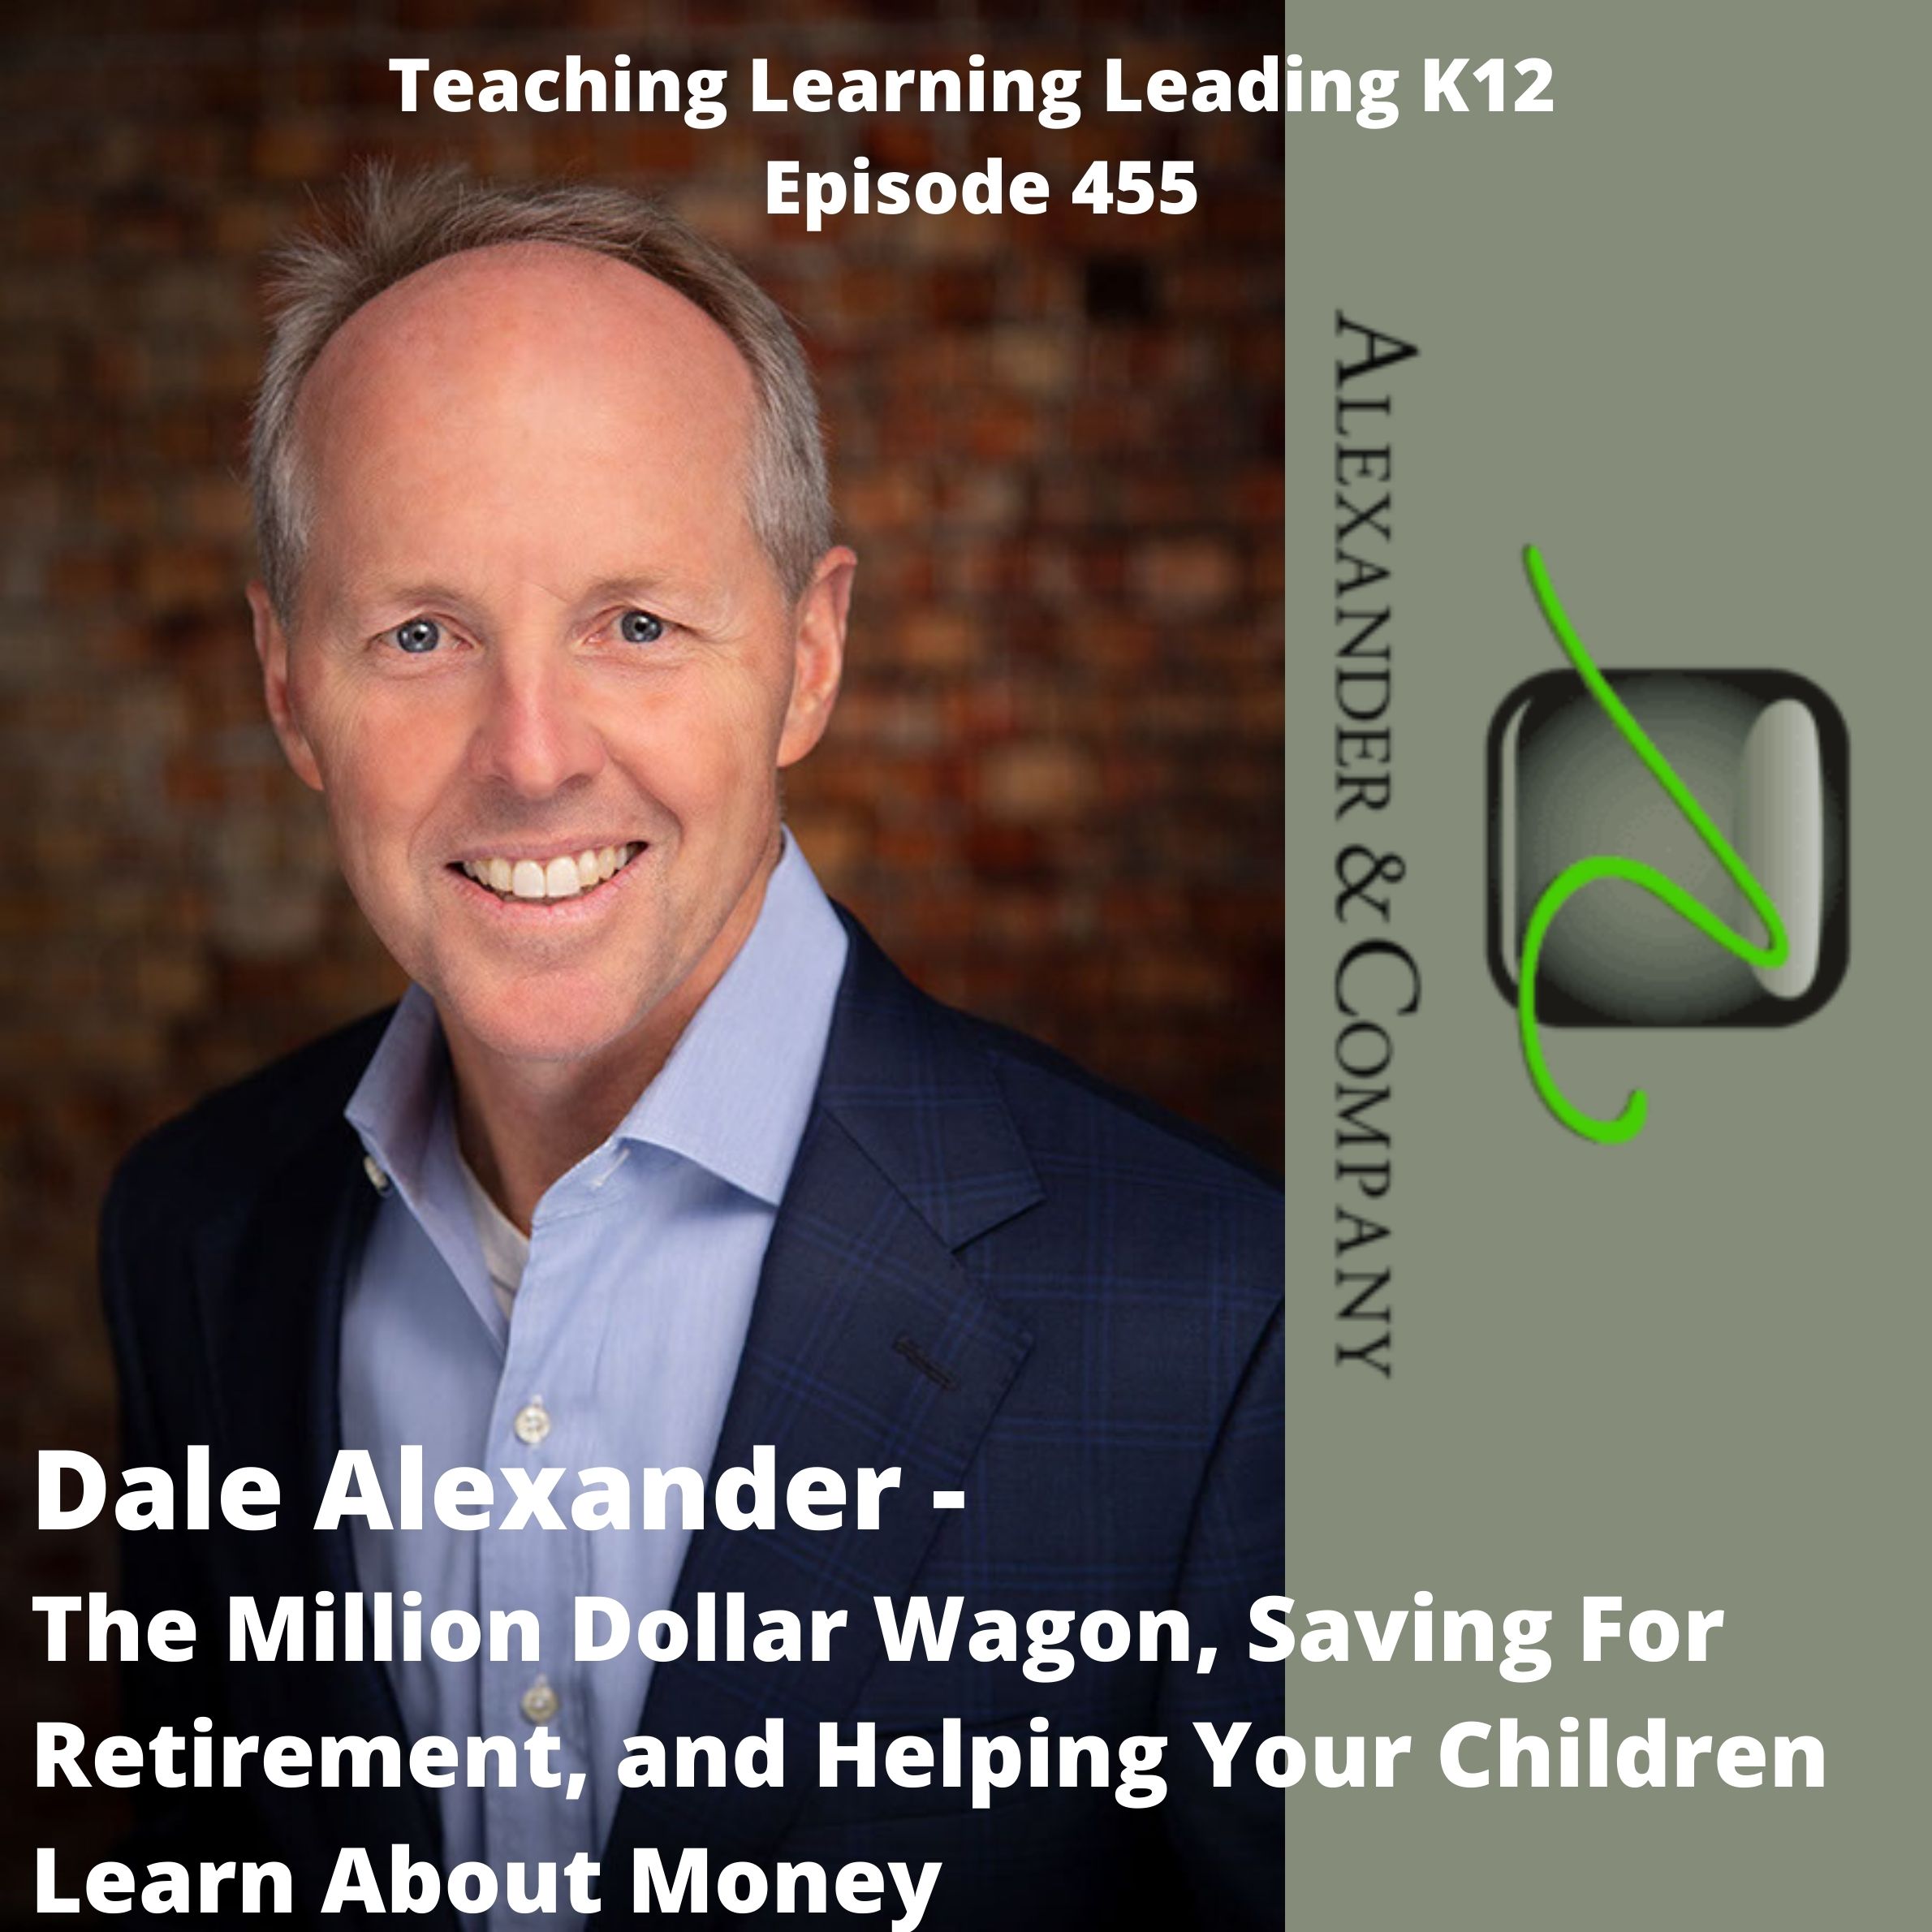 Dale Alexander: The Million Dollar Wagon, Saving for Retirement, and Helping Your Children Learn About Money - 455 Image